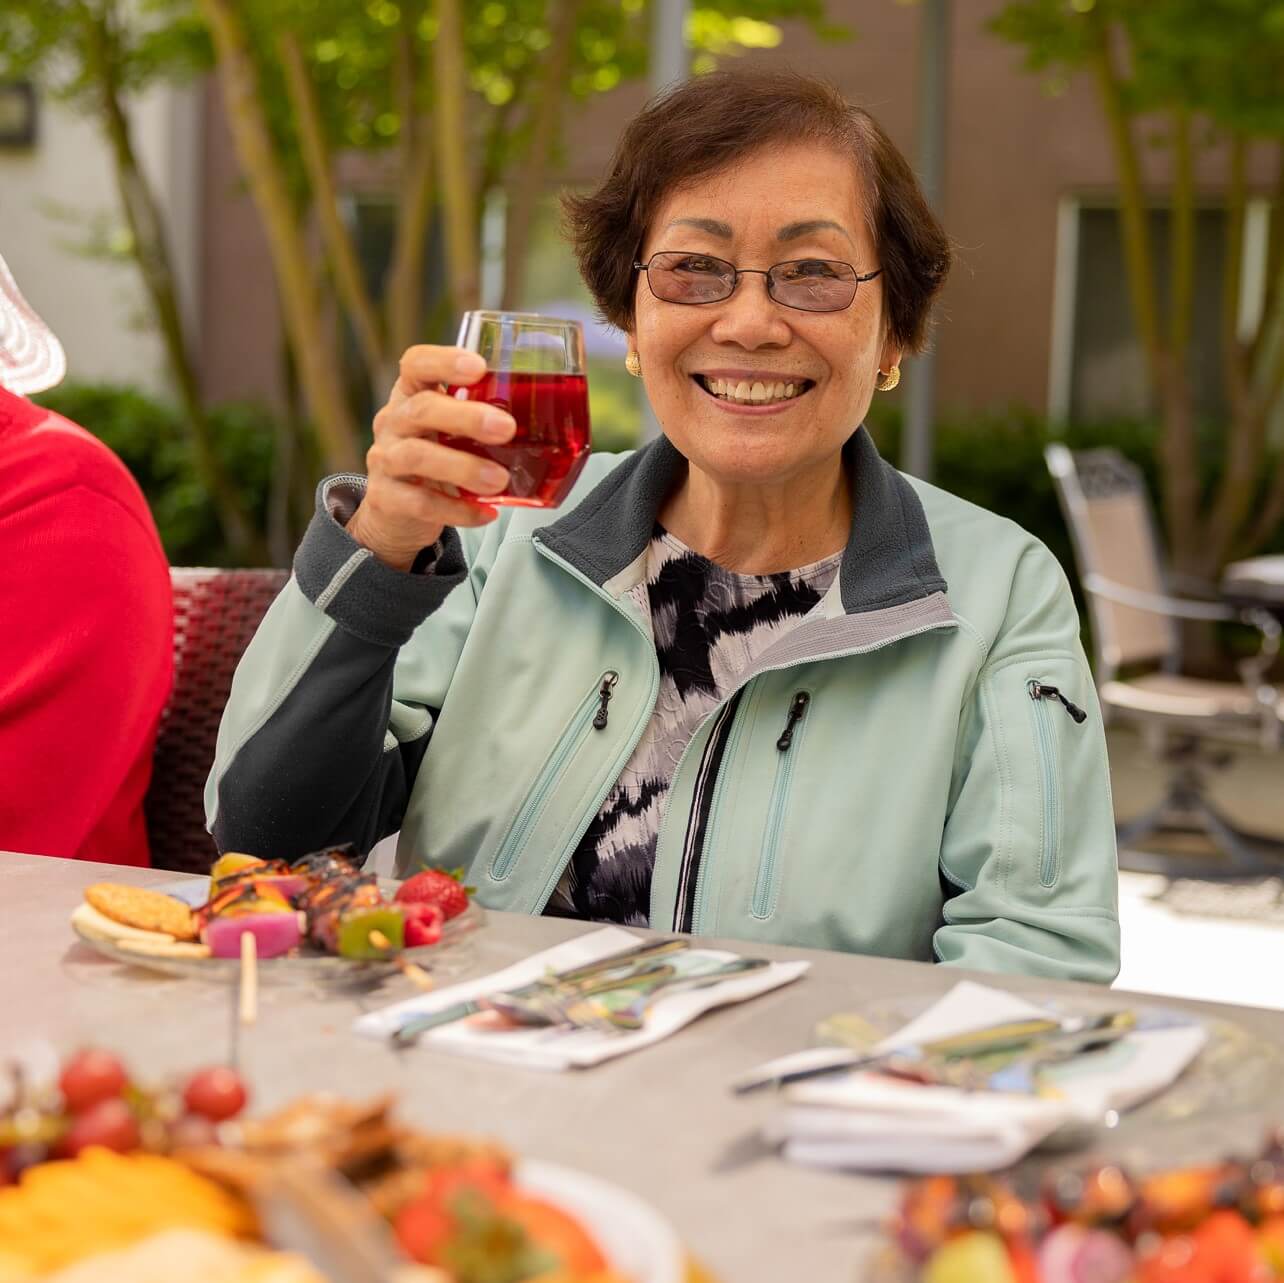 Enjoy Delicious and Healthy Meals, Vibrant Activities, Entertainment and More at Carlton Senior Living!